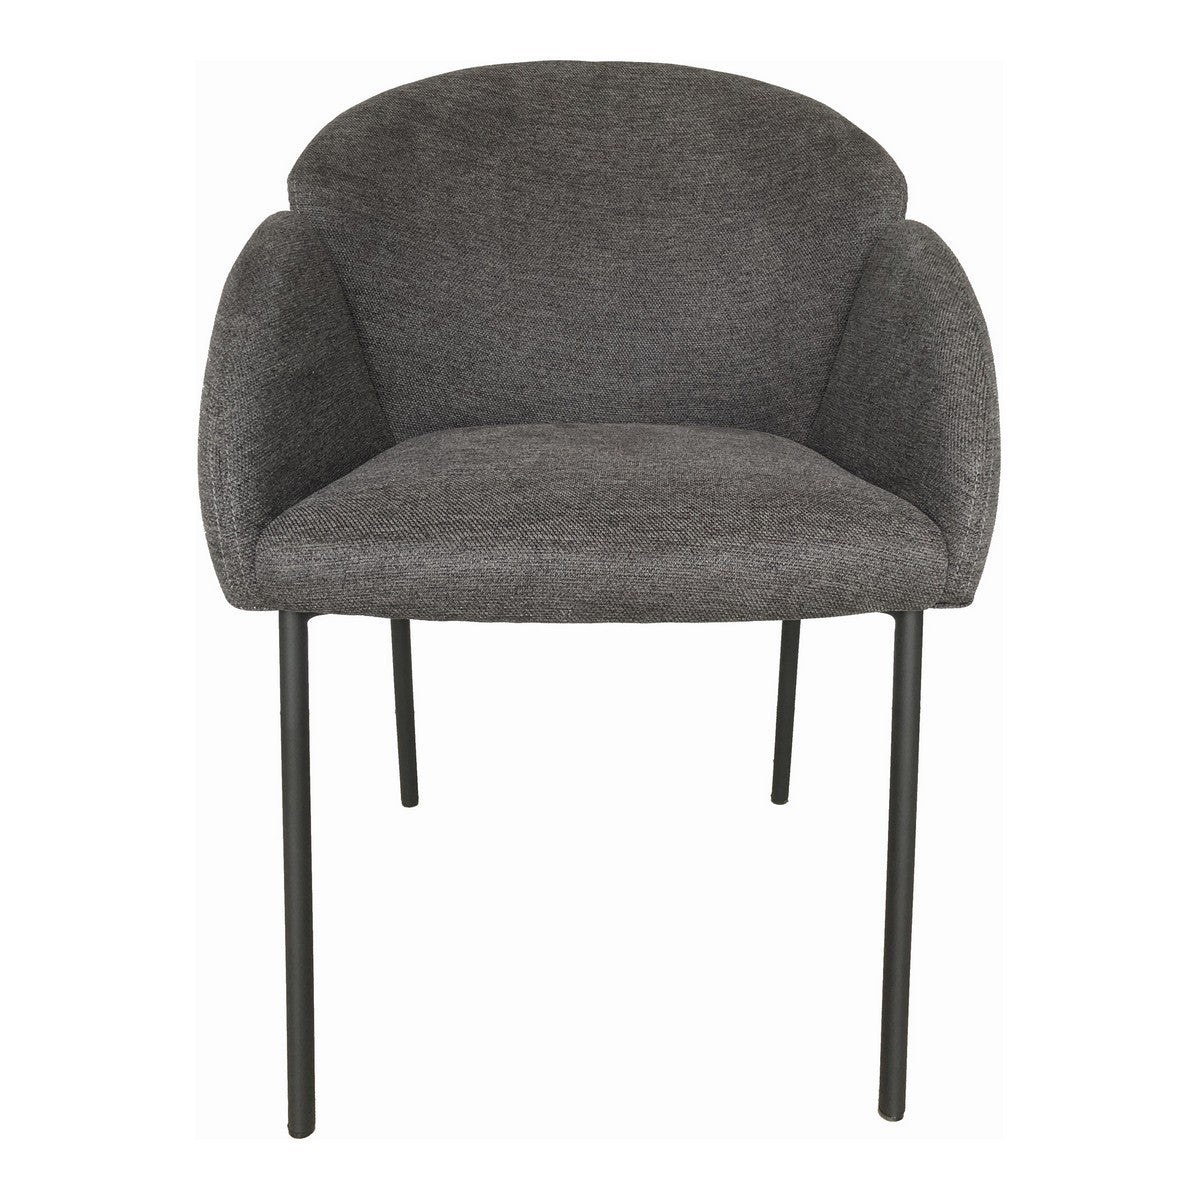 Moe's Home Collection Gigi Dining Chair Dark Grey-Set of Two - HK-1018-25 - Moe's Home Collection - Dining Chairs - Minimal And Modern - 1